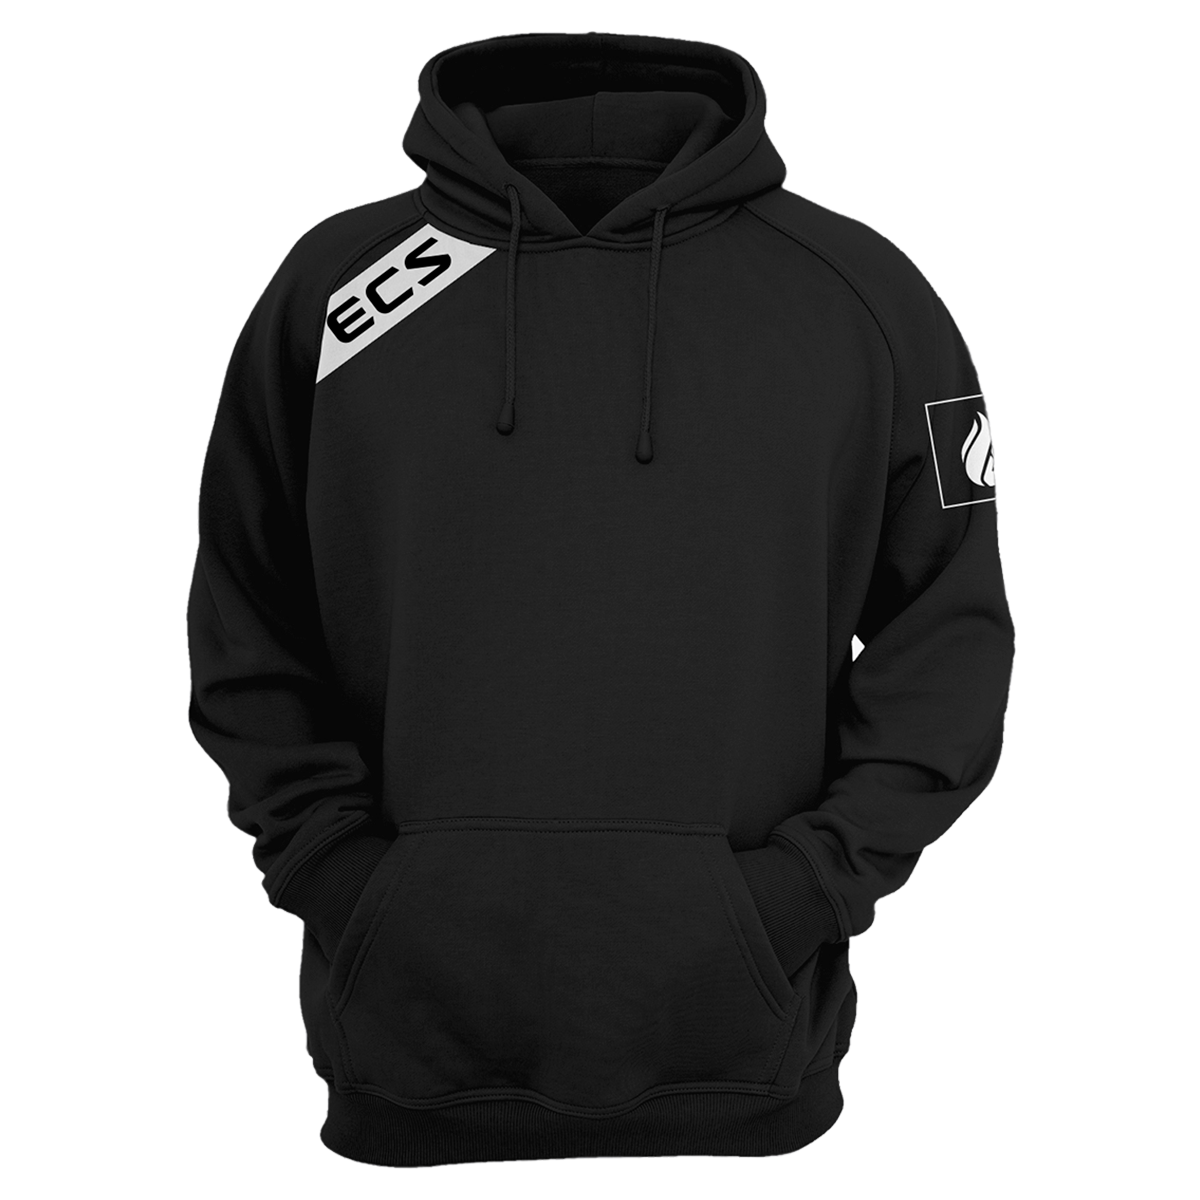 Nations ECS Slant Pullover Hoodie - Black - We Are Nations